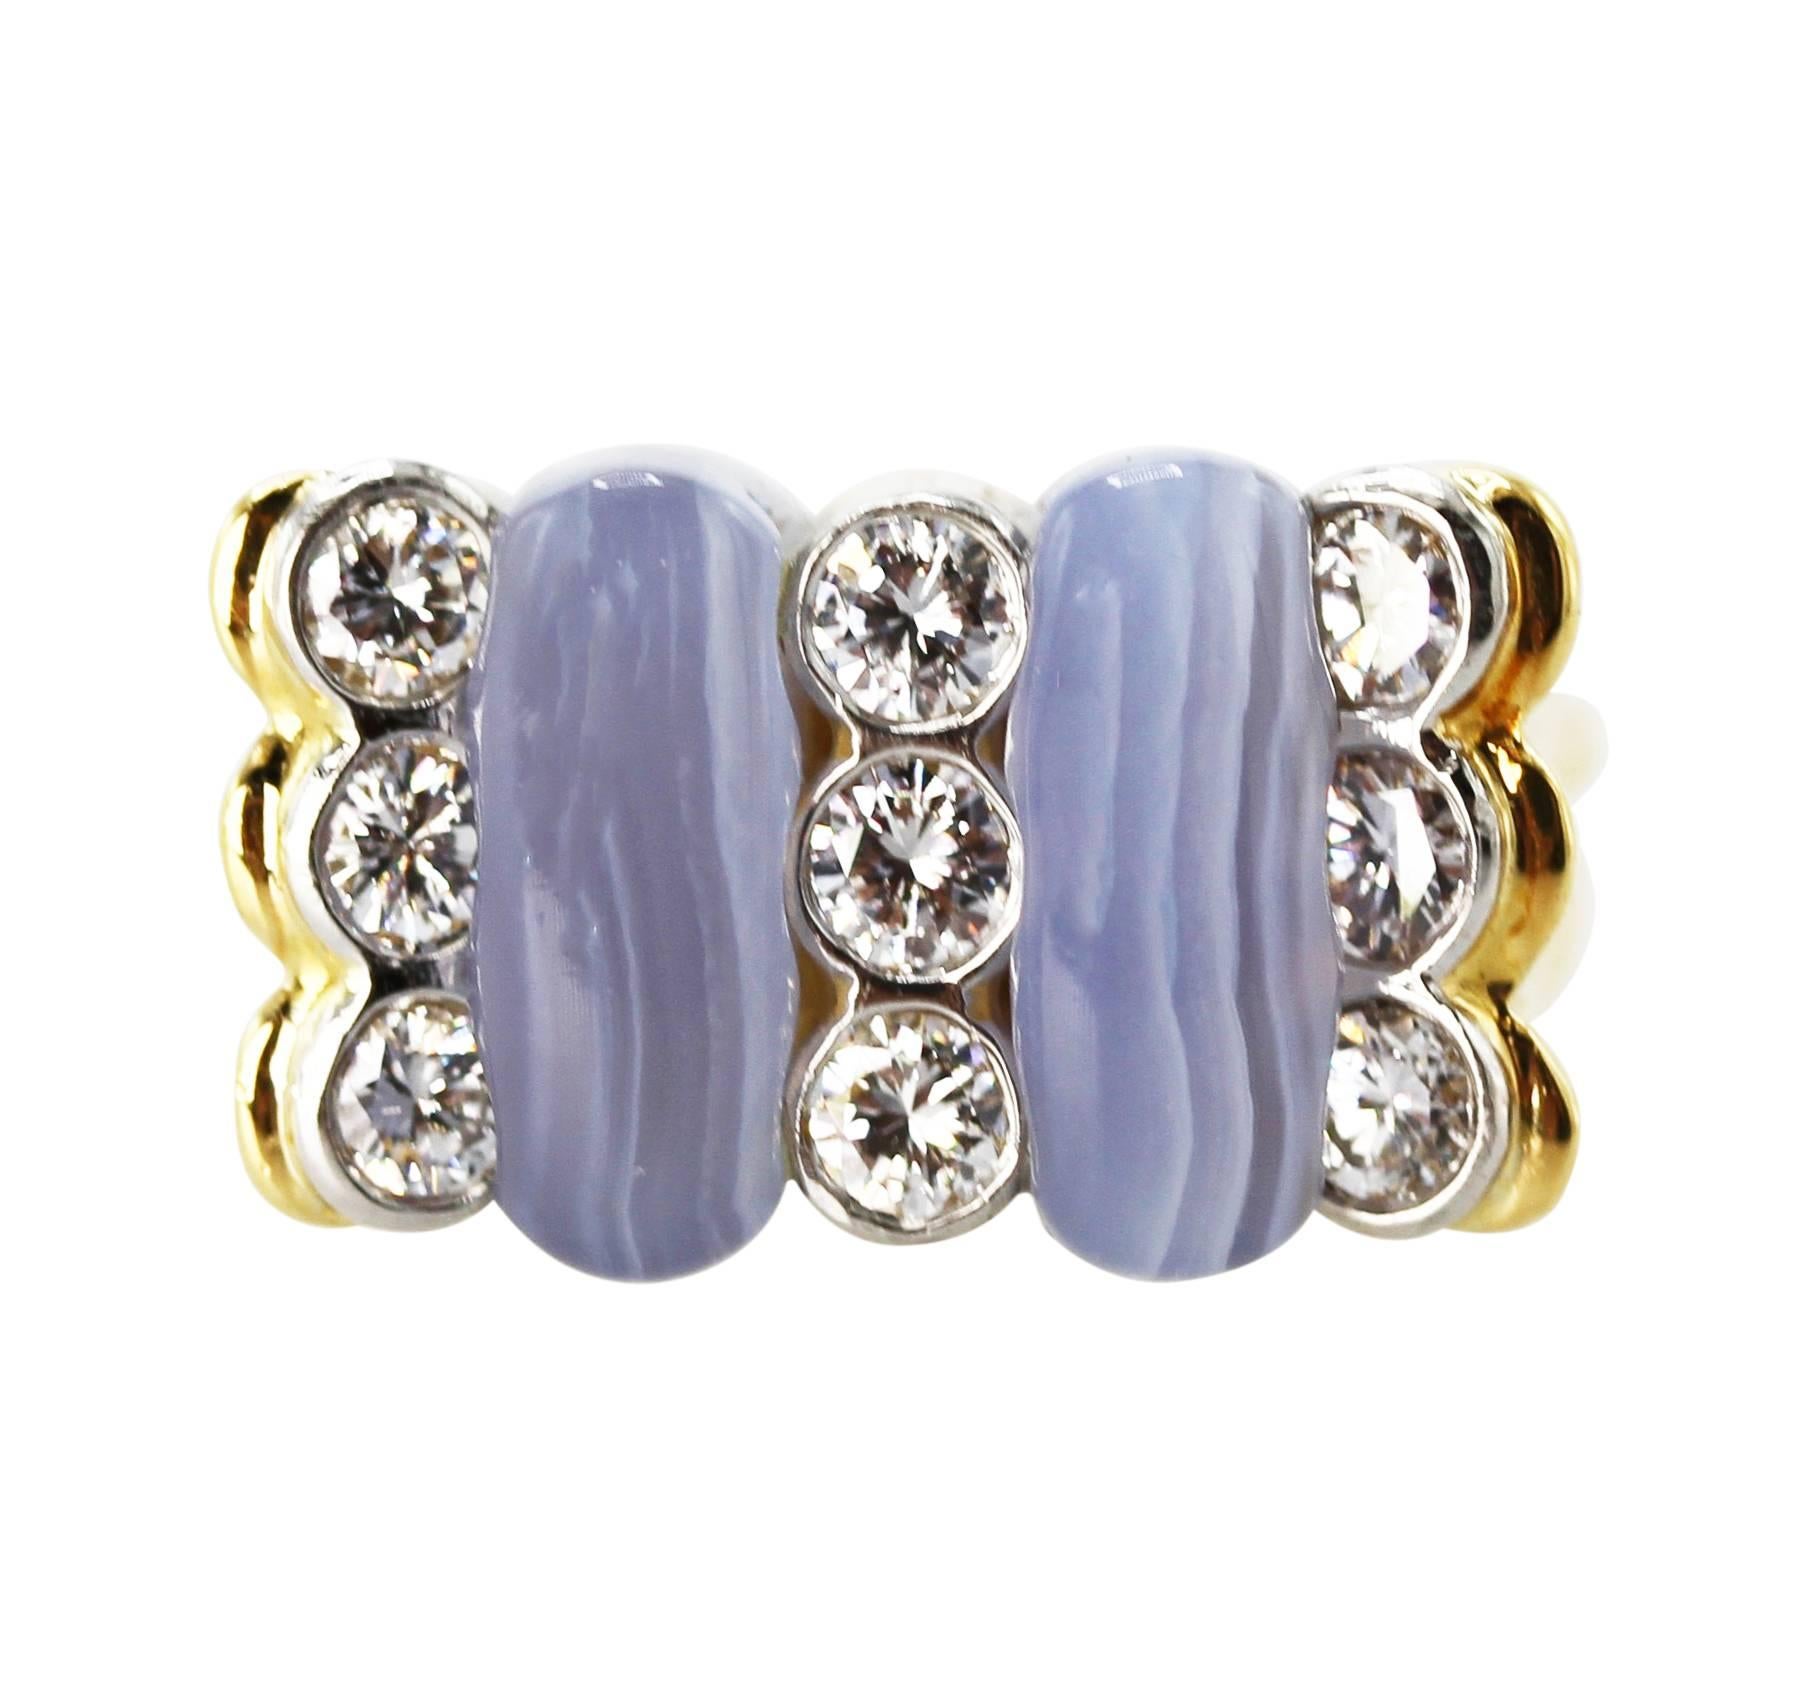 18 Karat Yellow Gold, Blue Agate and Diamond Ring by Carvin French
• Marked 750 with makers mark for Carvin French 
• 9 round diamonds approximately 1.35 carats 
• Size 5 3/4, gross weight 13.7 grams